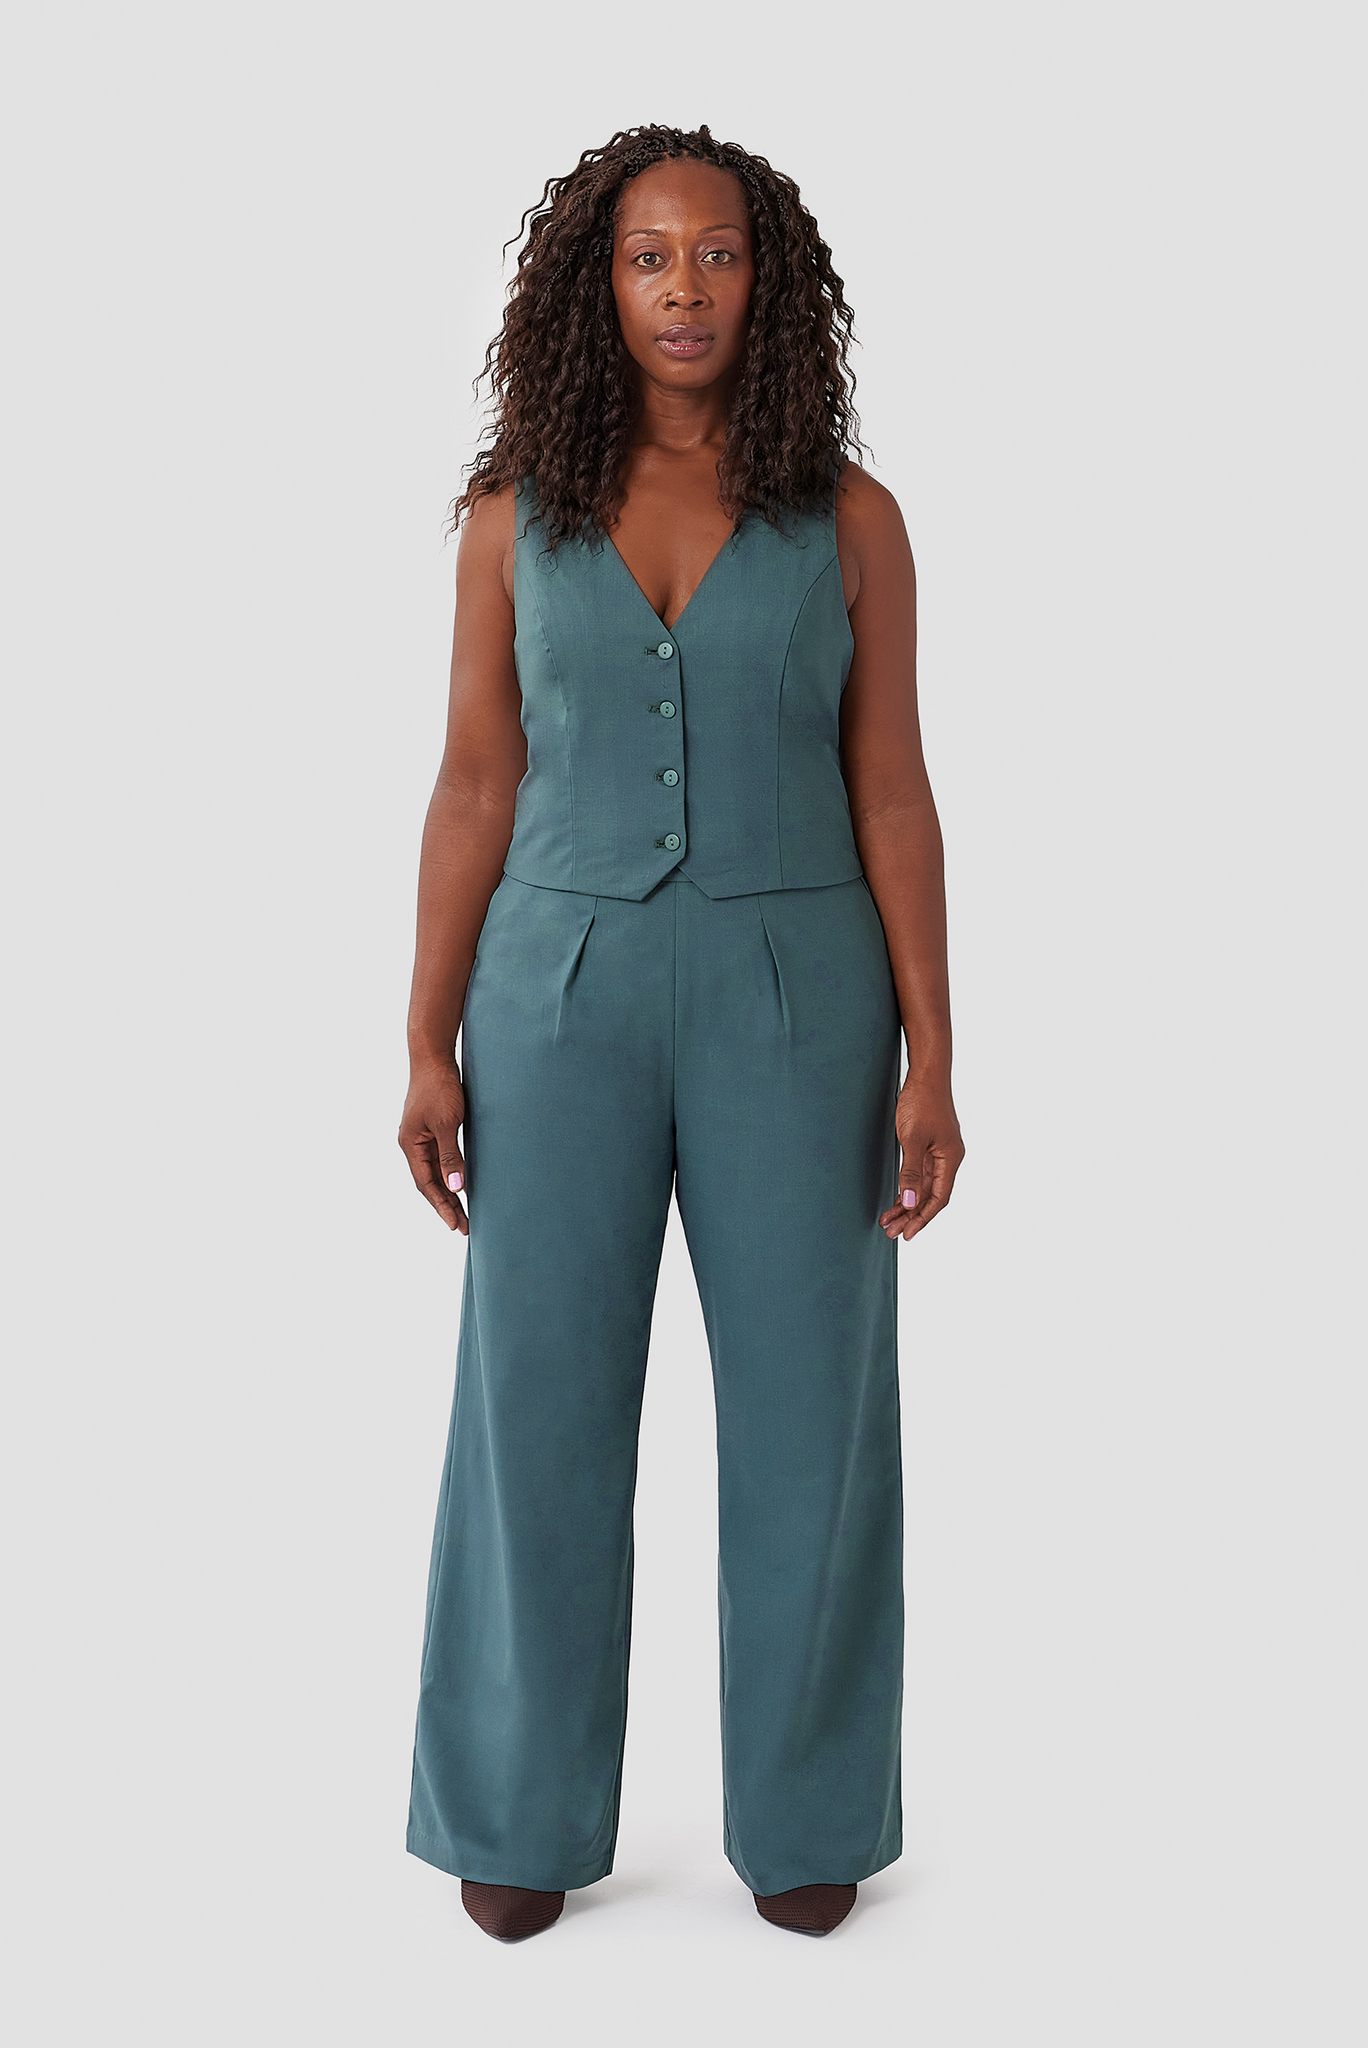 The Wool Wide Leg Pant by Aam takes our bestselling wide leg pants and updates them for the winter season. Made from a warm 96% wool with 4% stretch for comfort. And, fully lined with a supply organic lining for a smooth finish on the skin. Featuring an ultra-high waist and a roomy fit for full hips and thighs. Shown here is our striking teal grey color, paired with The Wool Vest.